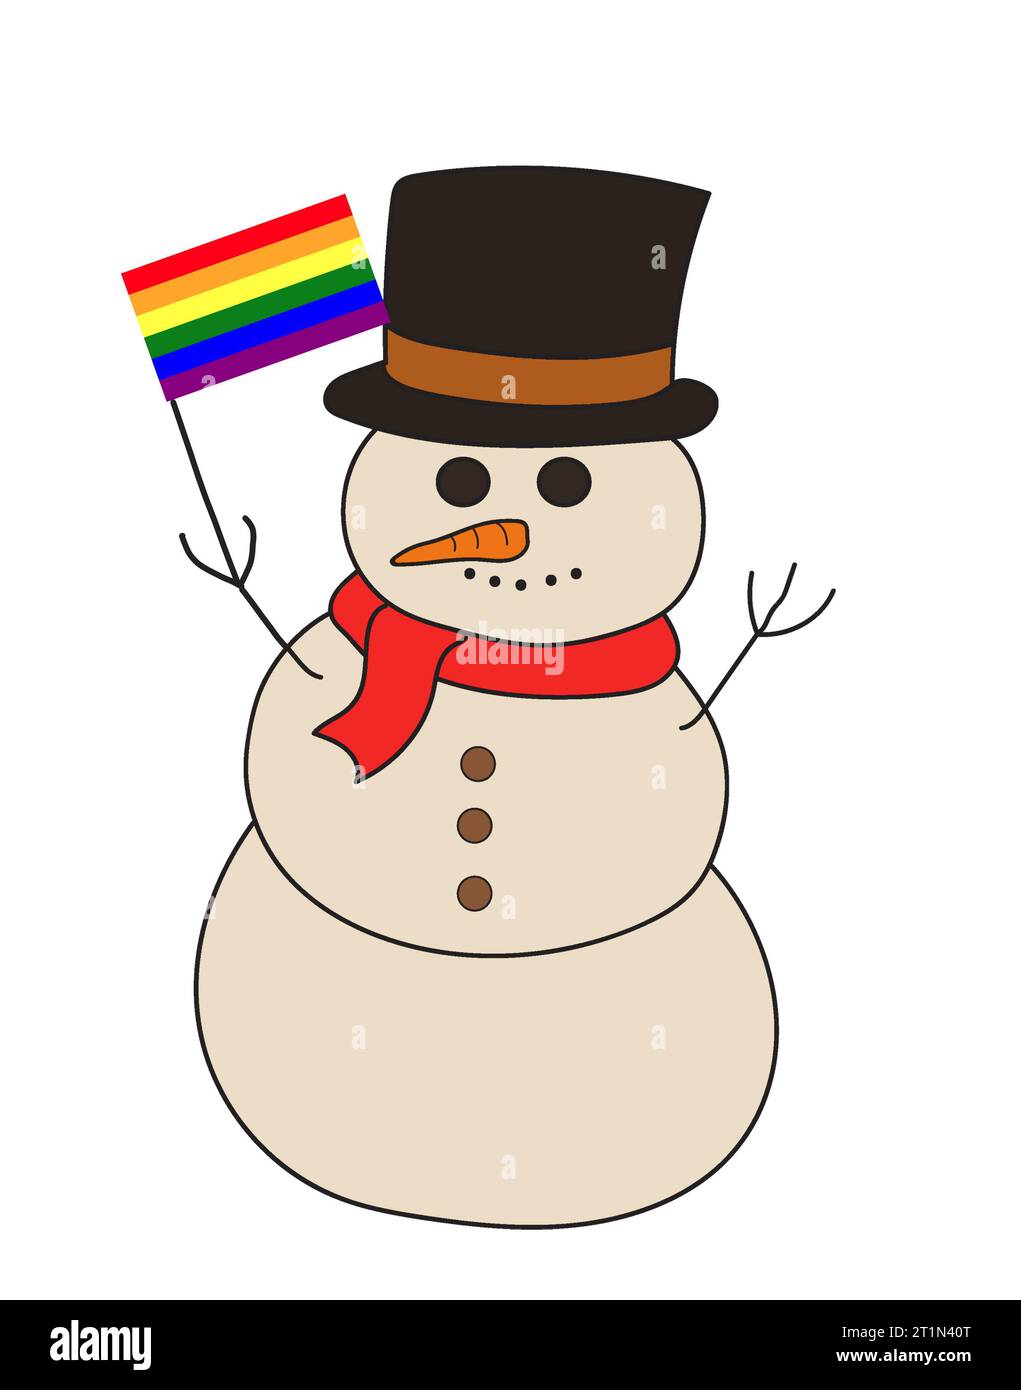 Cartoon drawing of snowman holding gay pride rainbow flag. Christmas celebration. Clipart illustration isolated on white background. Stock Photo